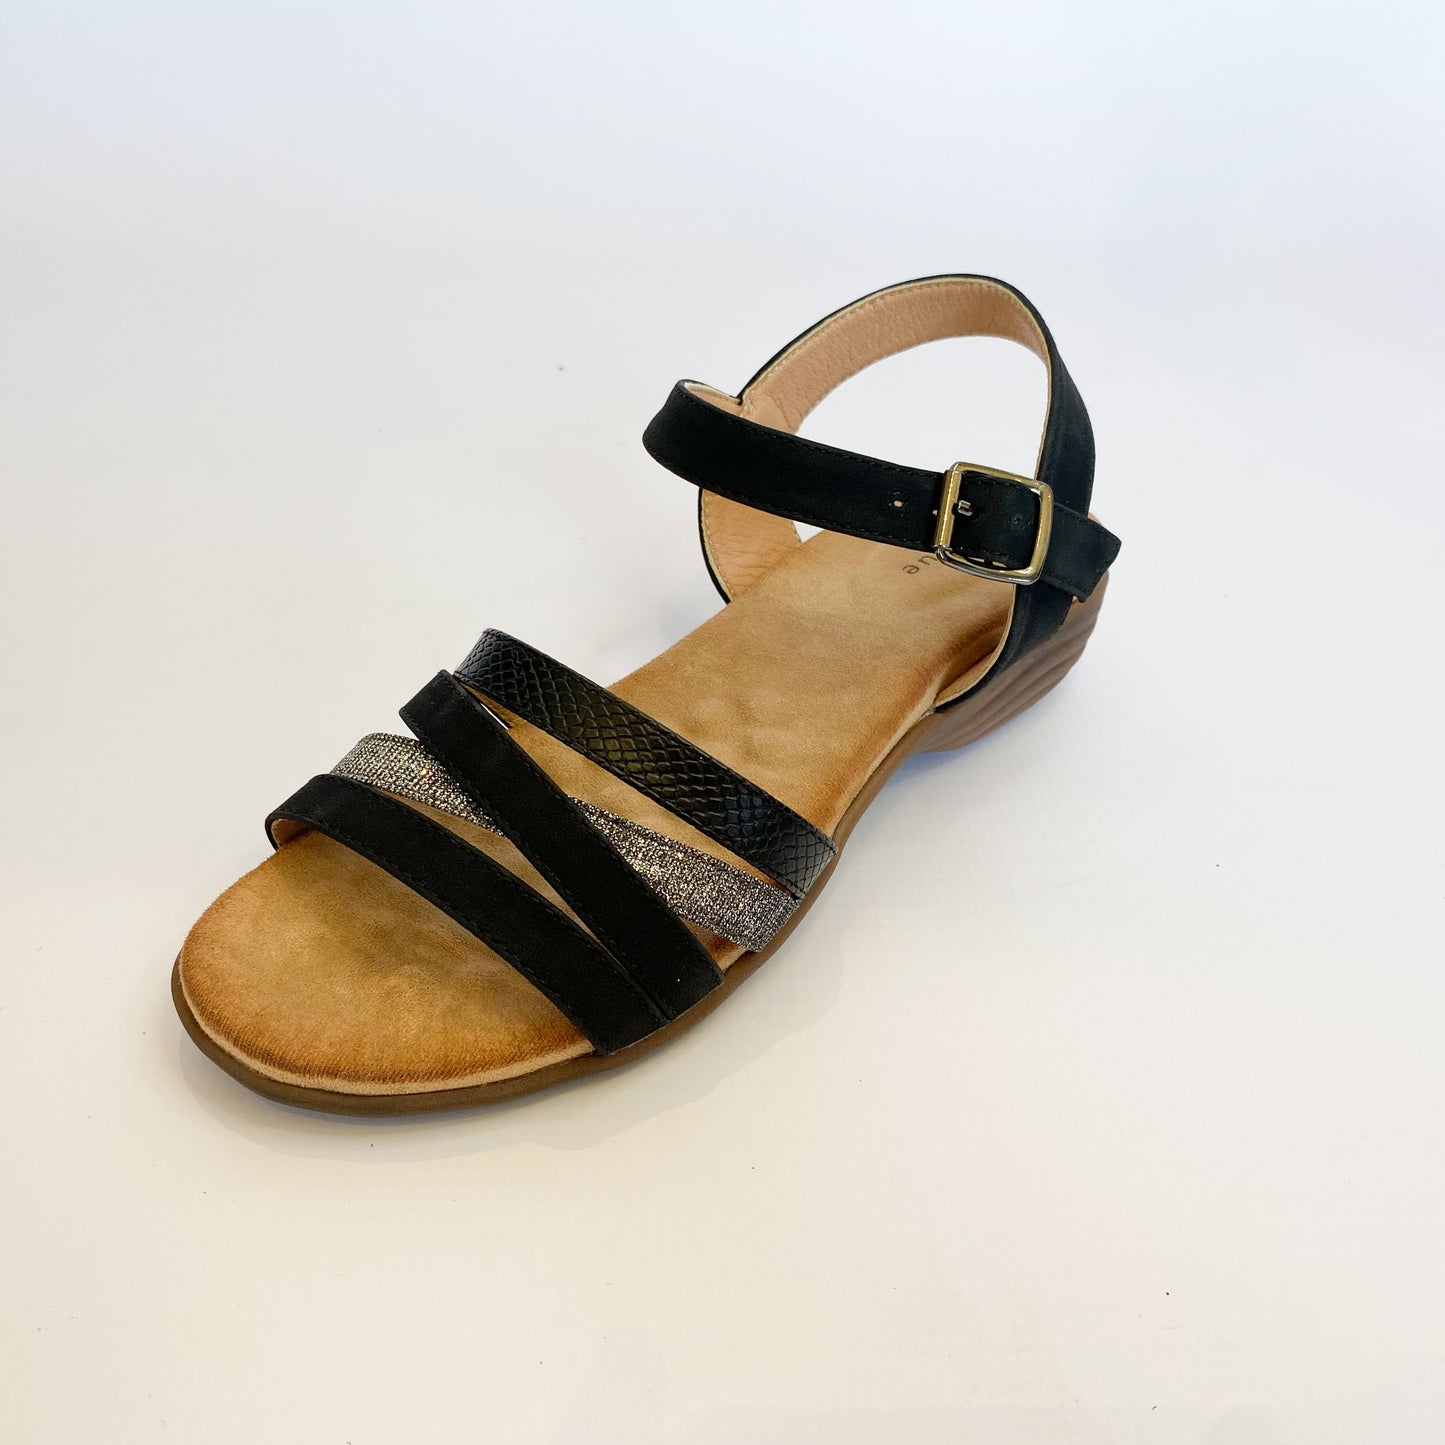 Queue black and silver strappy sandal